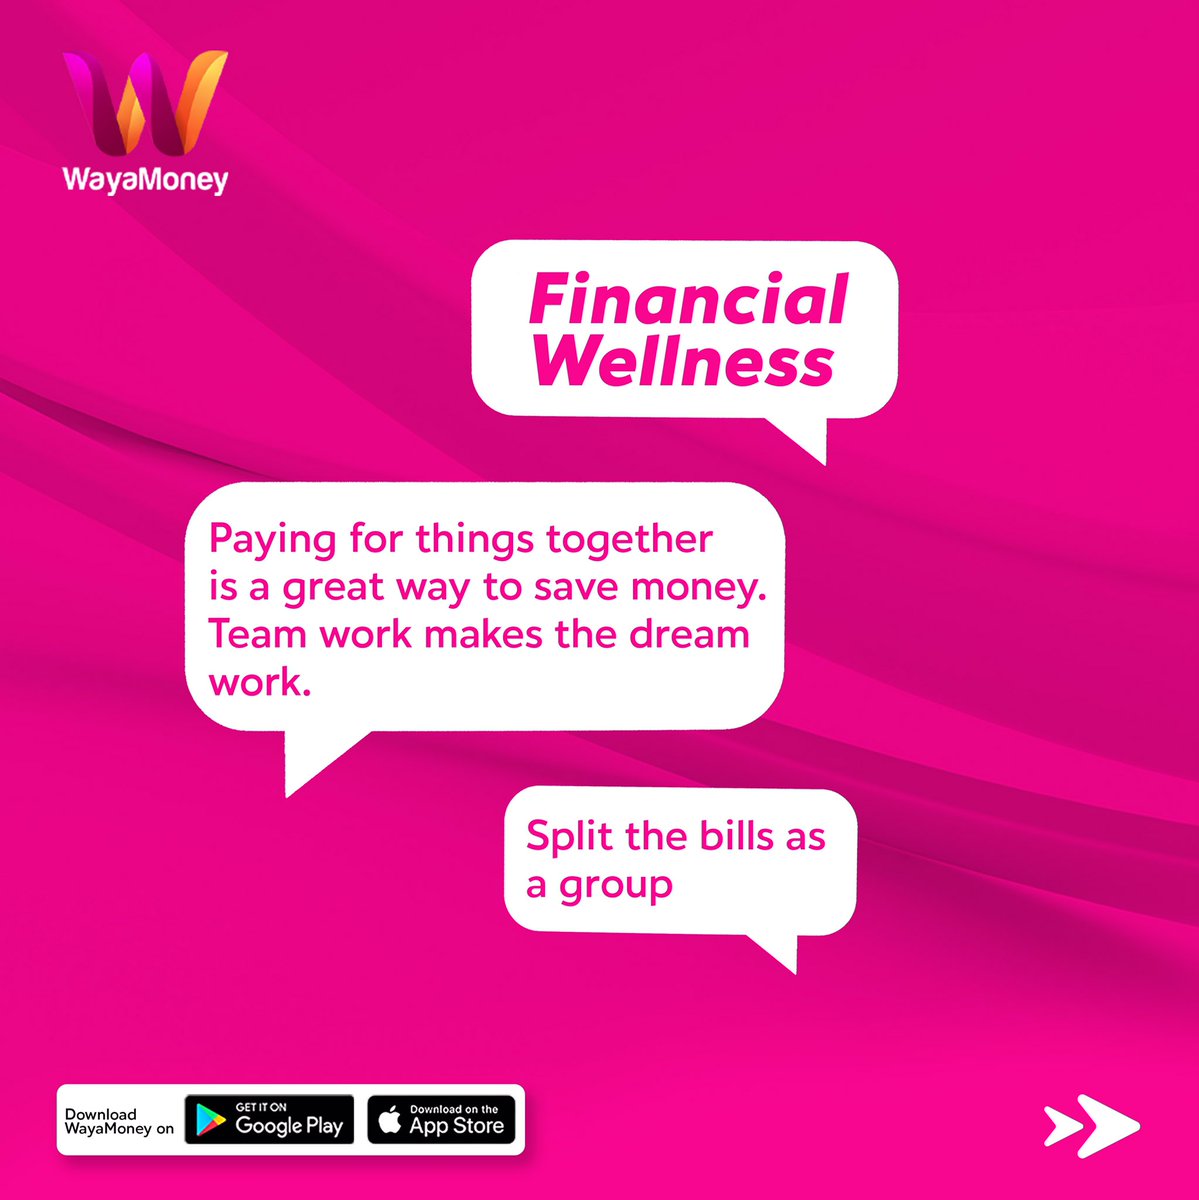 Here are some tidbits to make you more self-aware of  some small and avoidable mistakes that get your finances in the mud. Swipe to read all 😉🙂

#wayamoney #wayacares #financialwellness #takingcharge